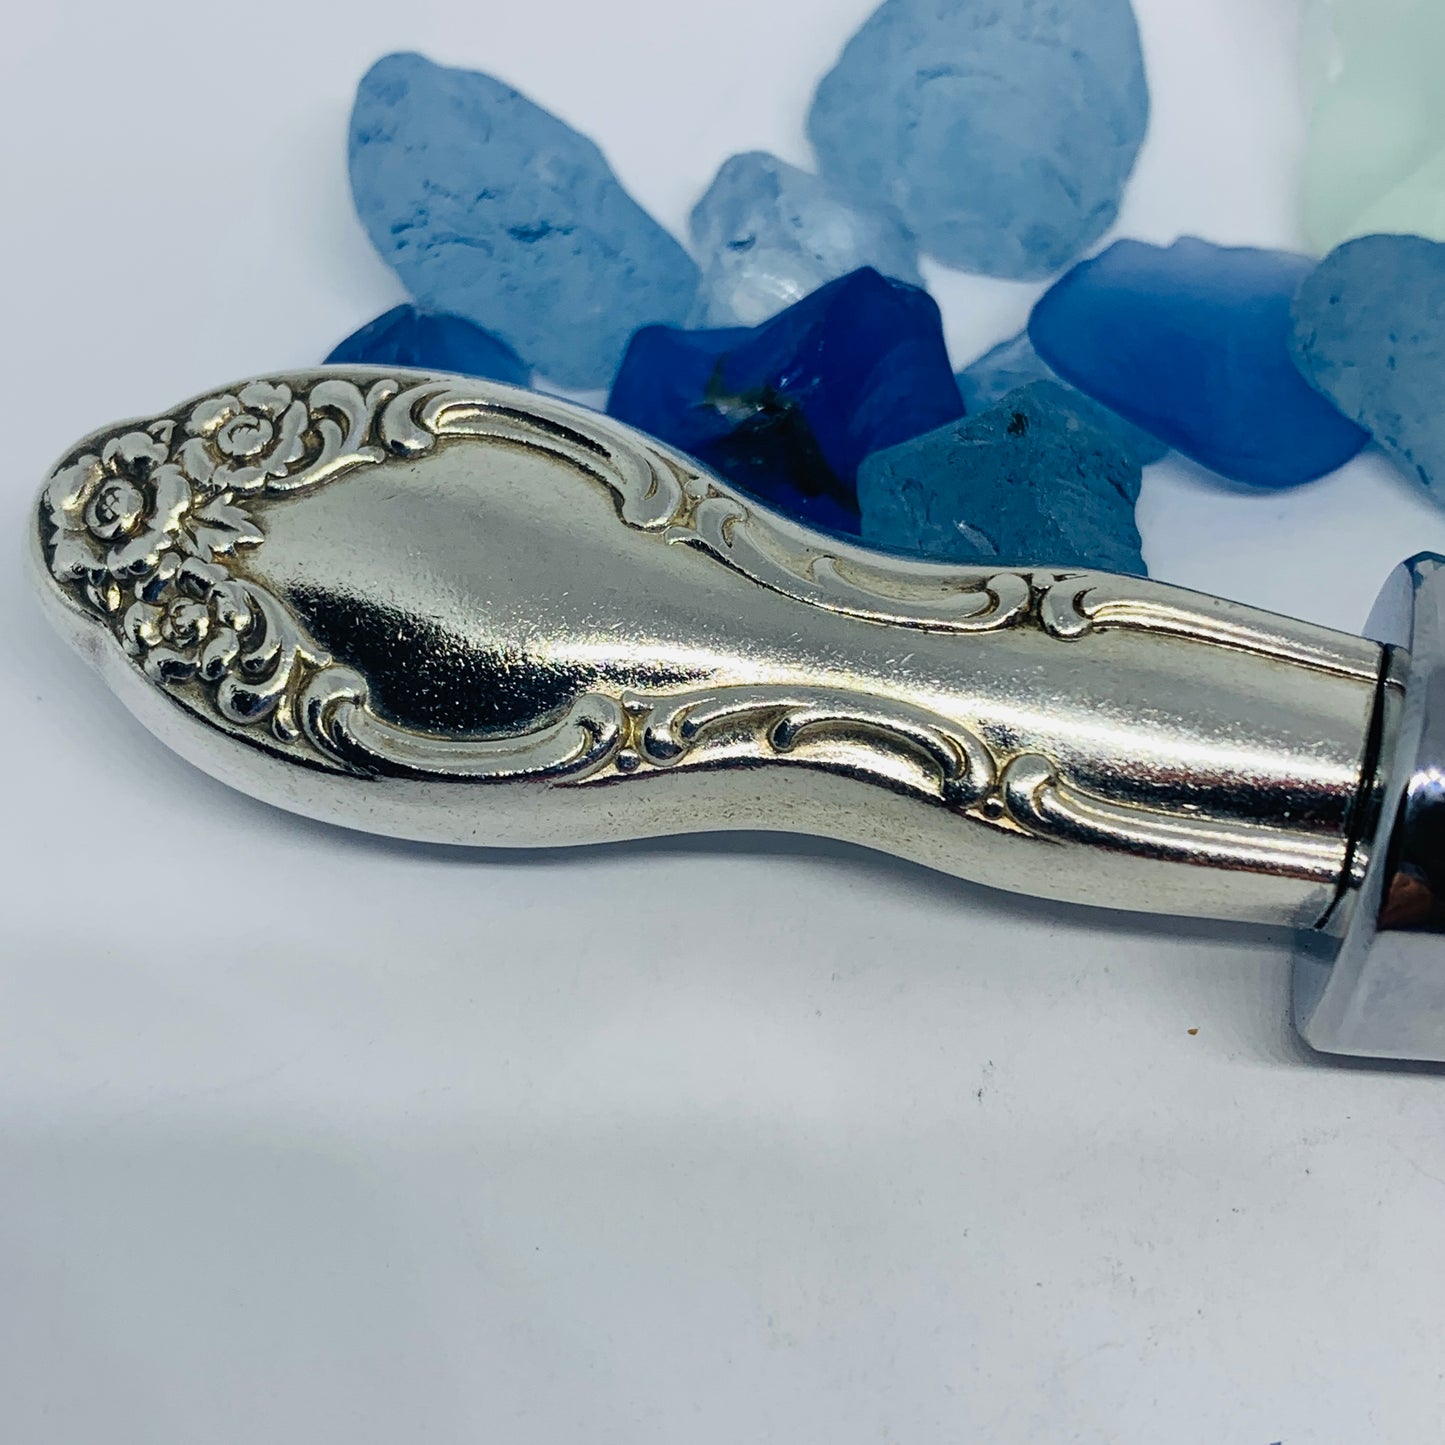 "Lady Densmore” Vintage Silverware Bottle Stopper | Int’l Silver 1955 | Up-Cycled Wine Stopper | Silverware Bottle Closure | Antique Knife Handle Wine Plug